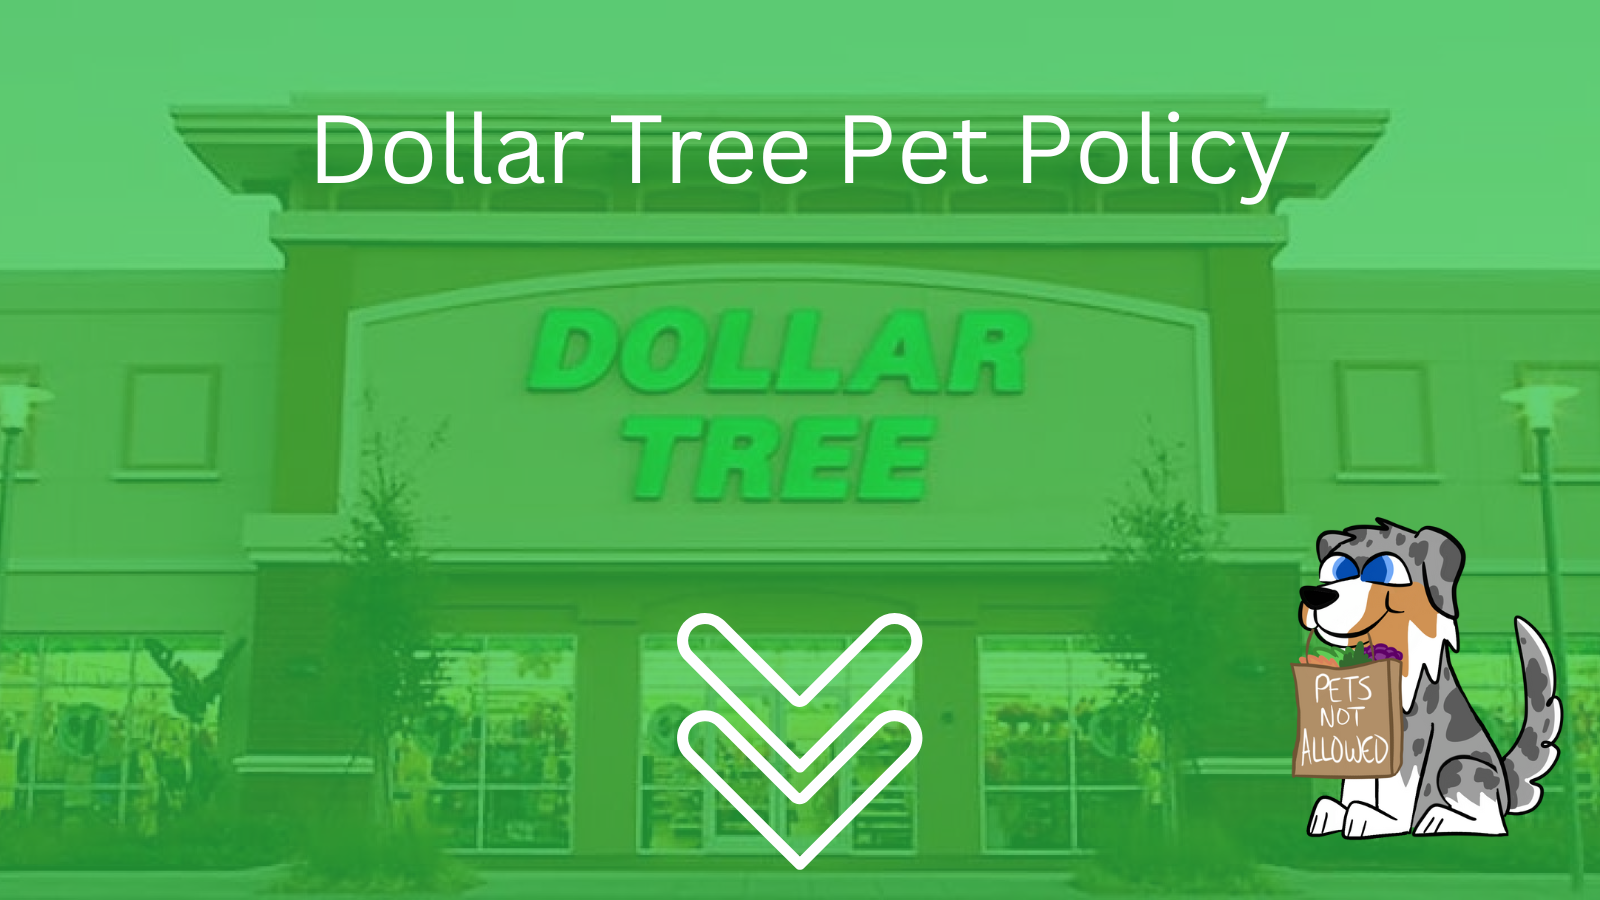 Image Text: "Dollar Tree Pet Policy"